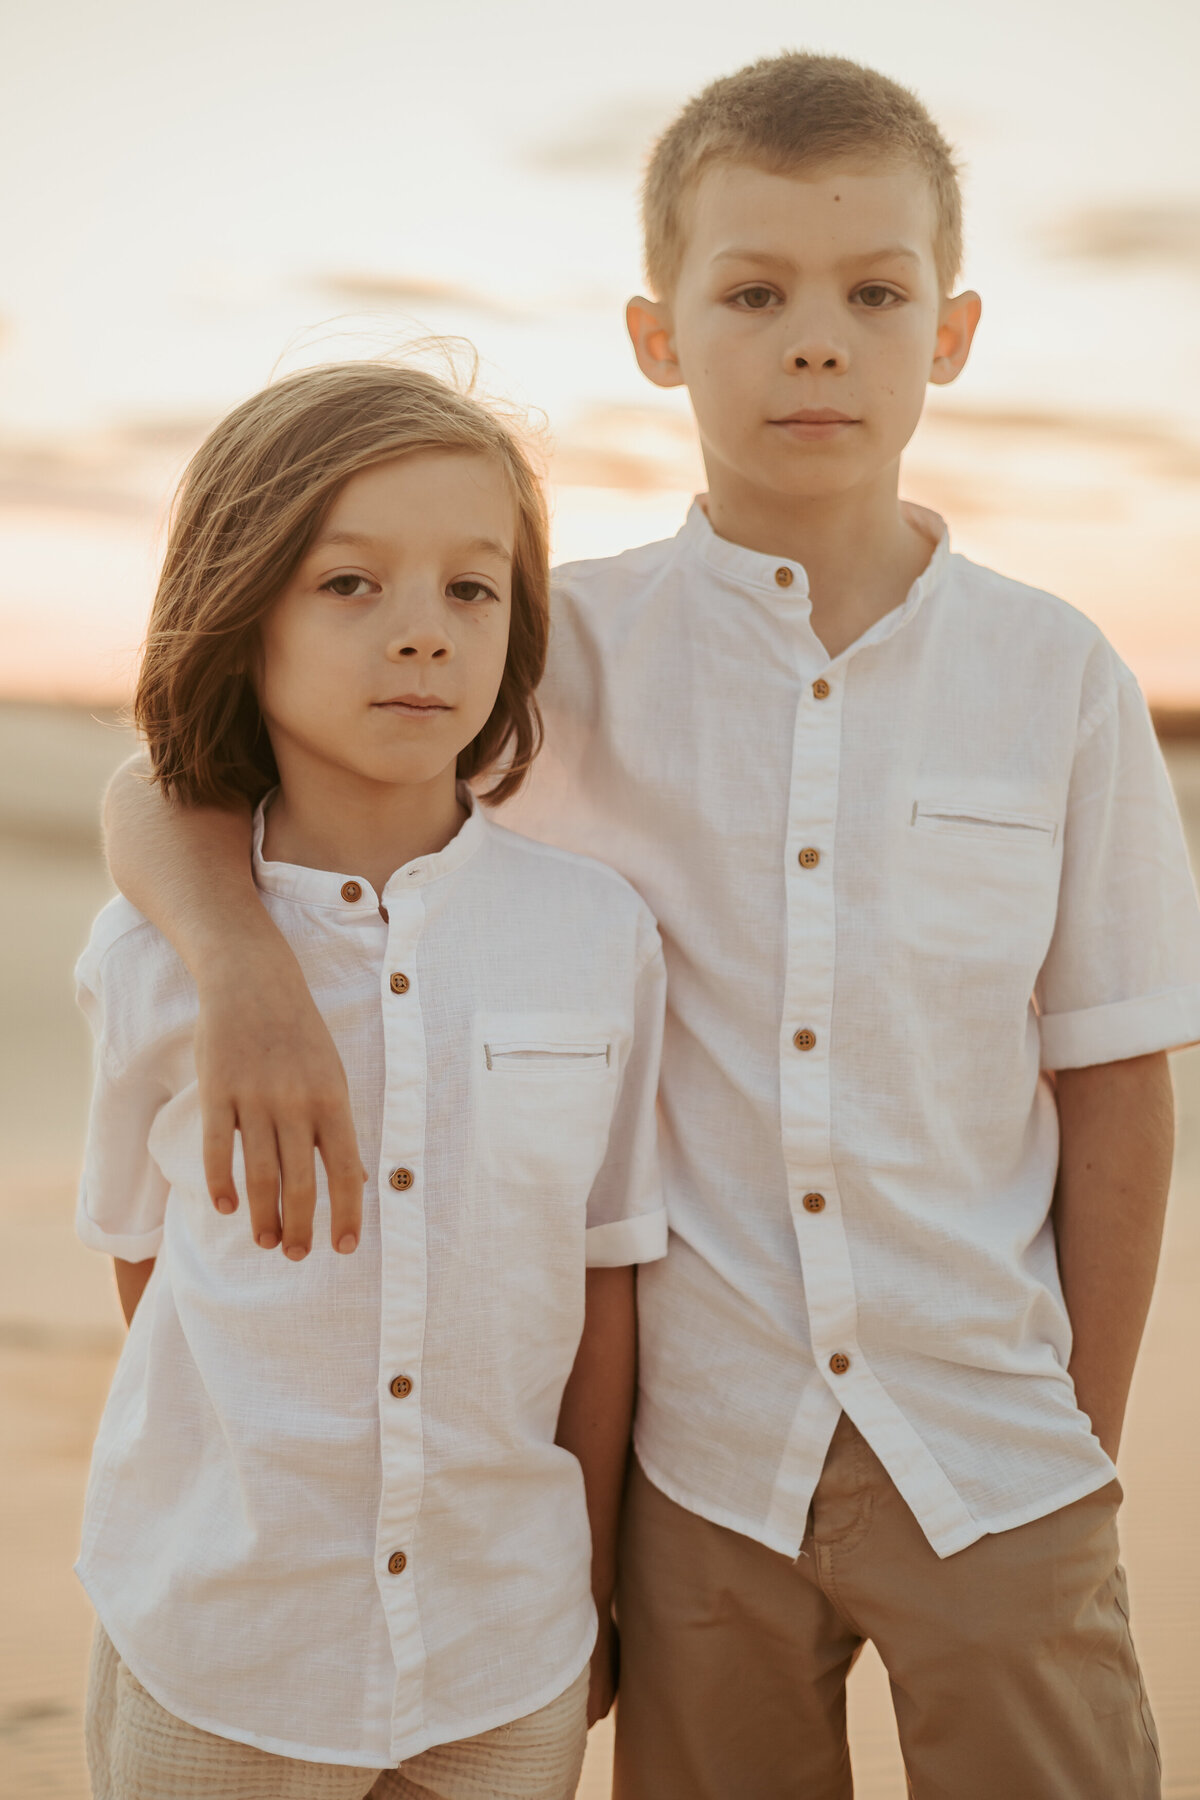 A young boy has his arm around his younger brother as they stare directly into the camera for their photoshoot.